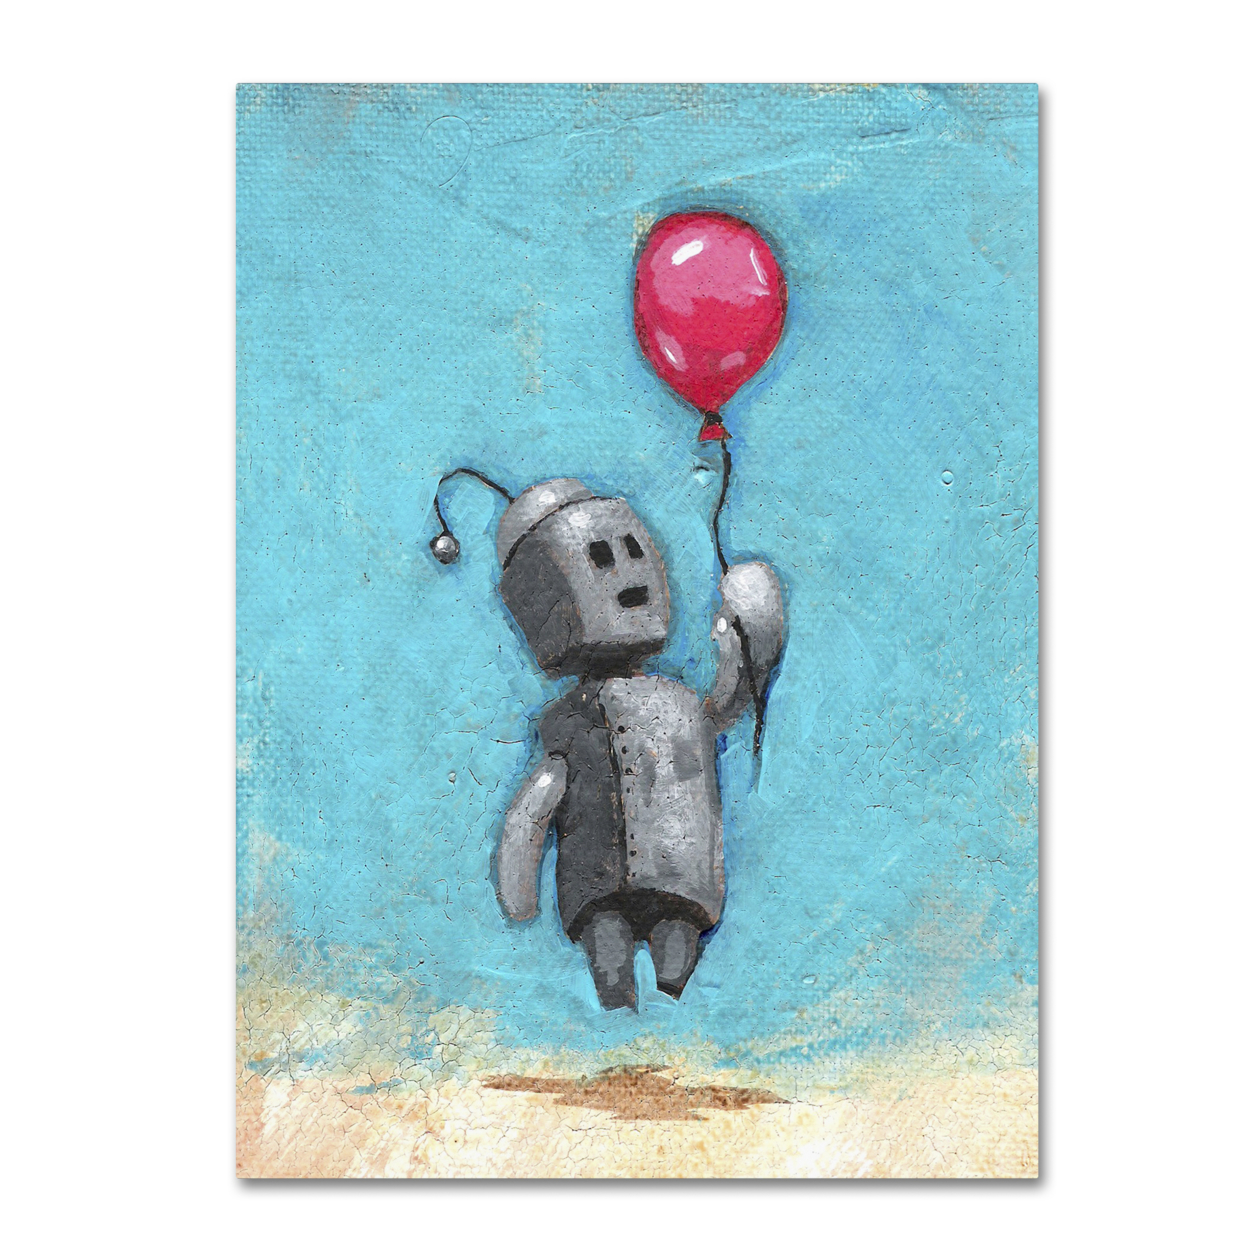 Craig Snodgrass 'Robot With Red Balloon' Canvas Wall Art 35 X 47 Inches